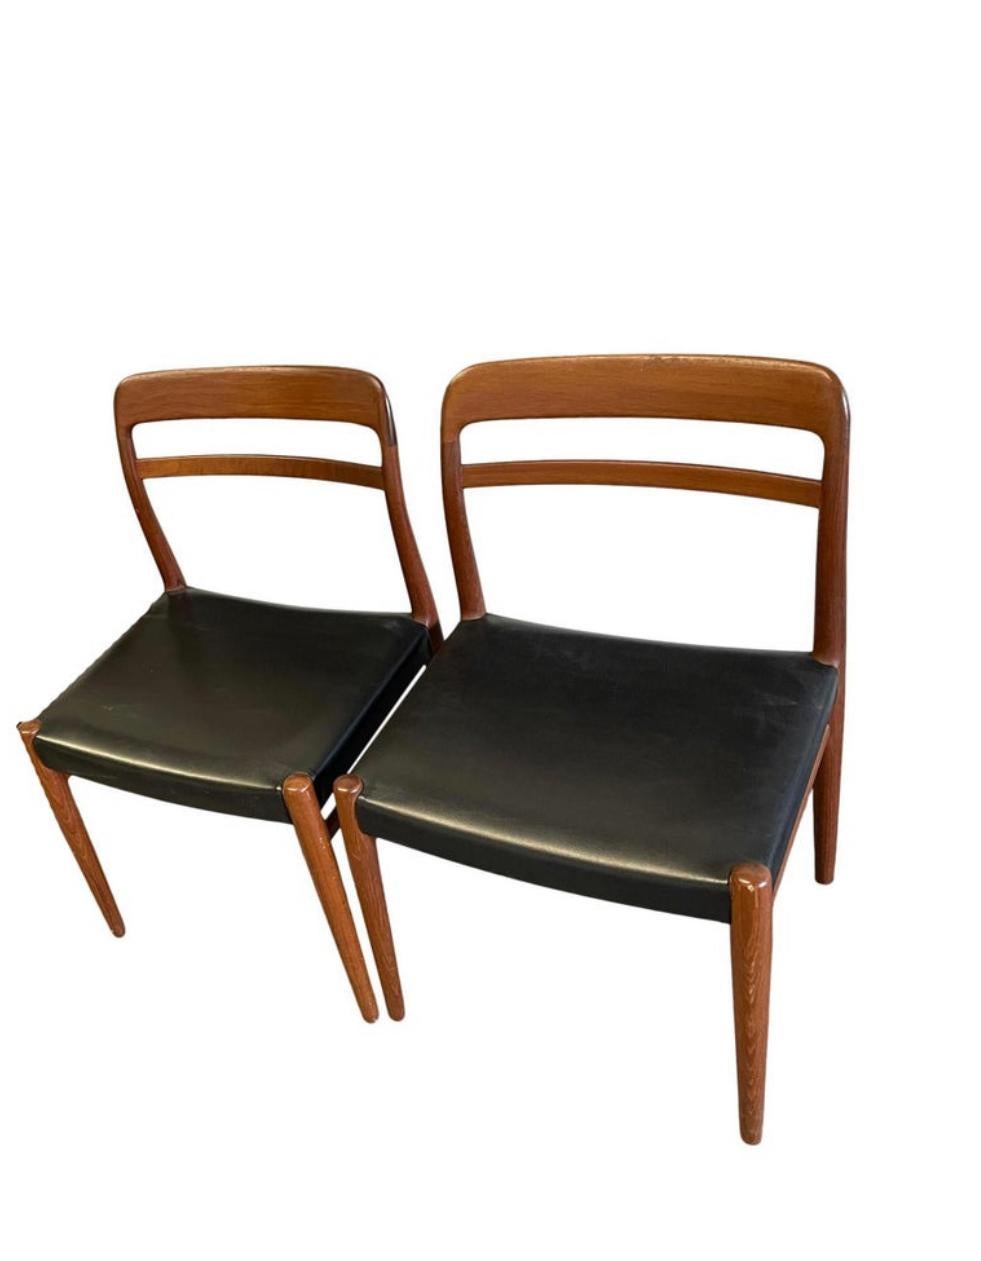 Pair of Mid Century Norwegian teak dining chairs curved back. Black Vinyl seat cushions - Chairs appear to be in original vintage condition. Very clean and sturdy. Stamp under seat. Located in Brooklyn NYC.

This listing is for 2 chairs.

Made in